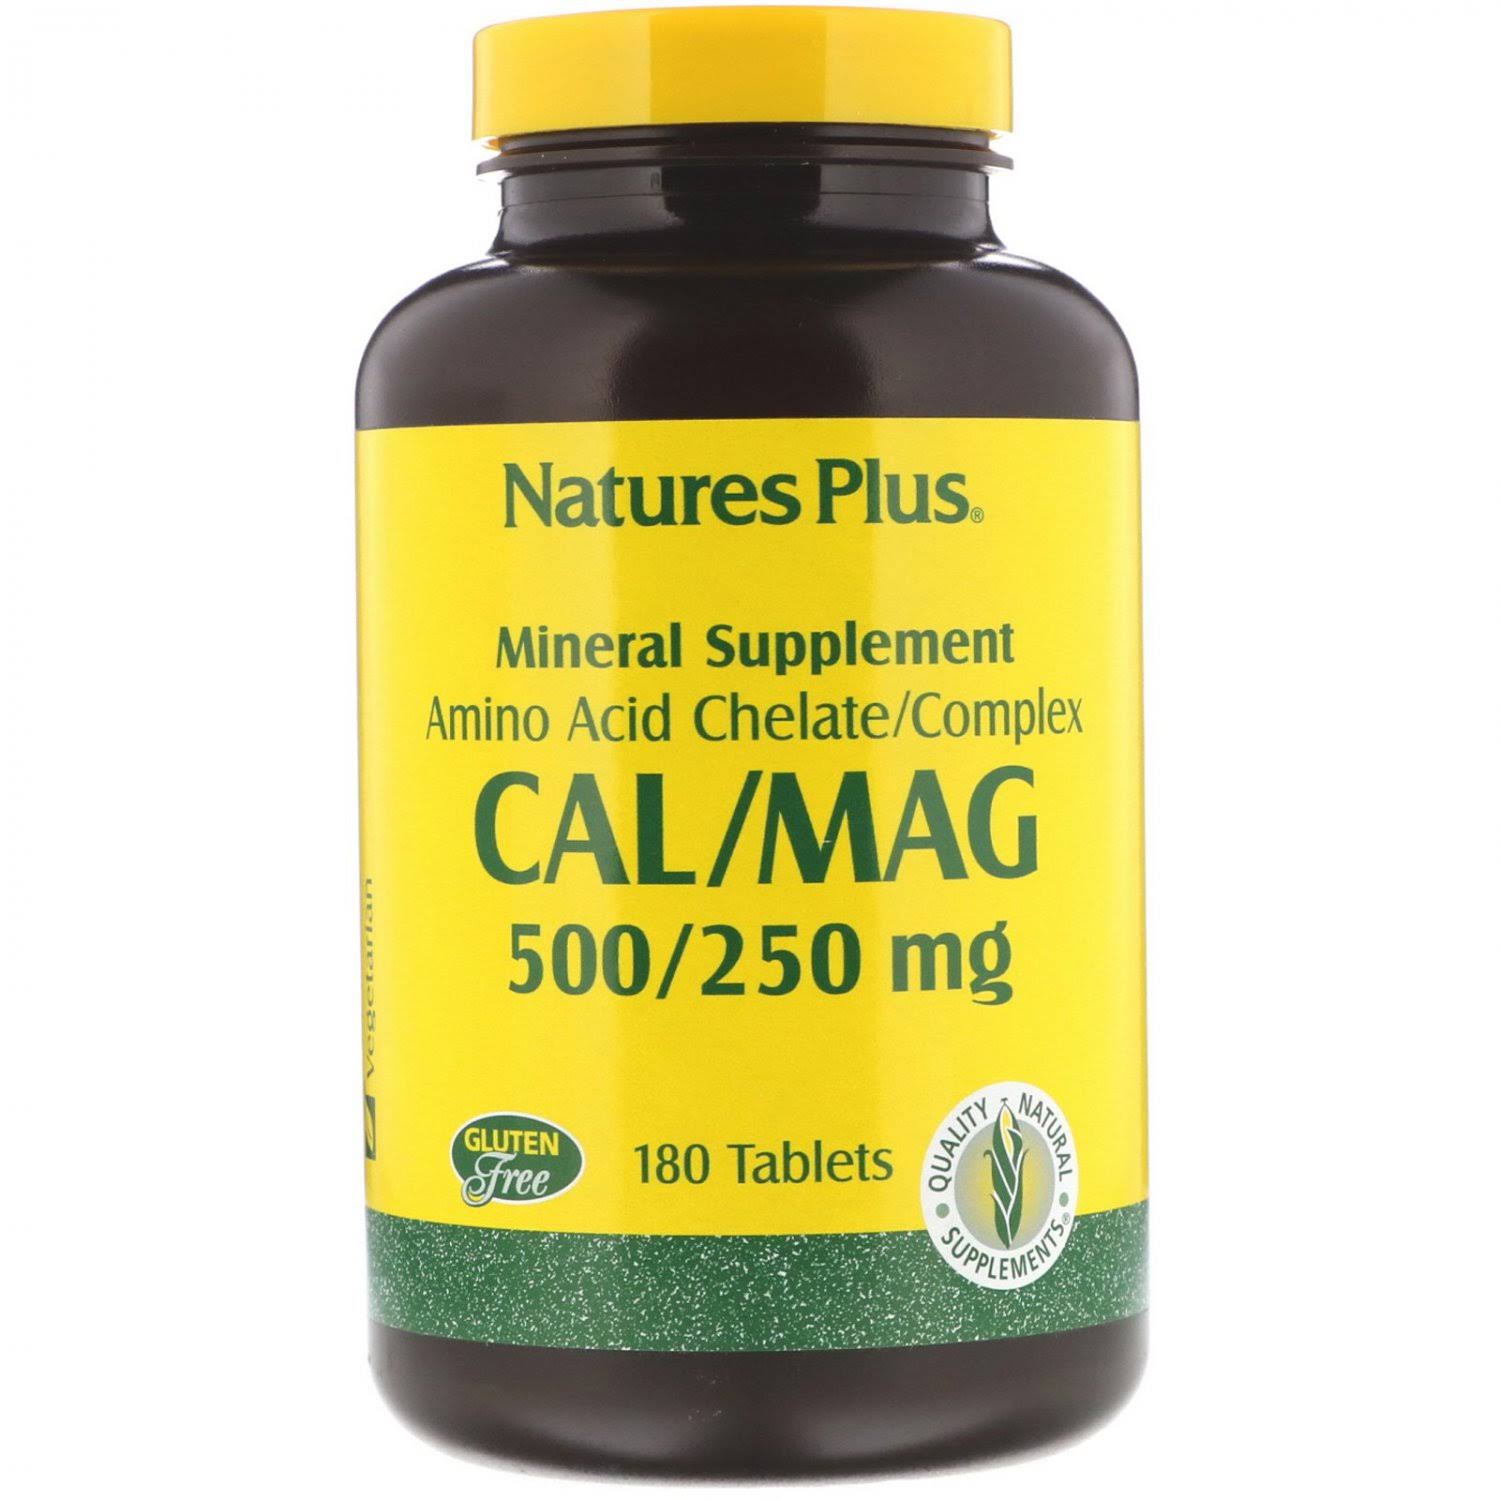 Natures Plus Cal Mag Mineral Supplement - 180 tablet